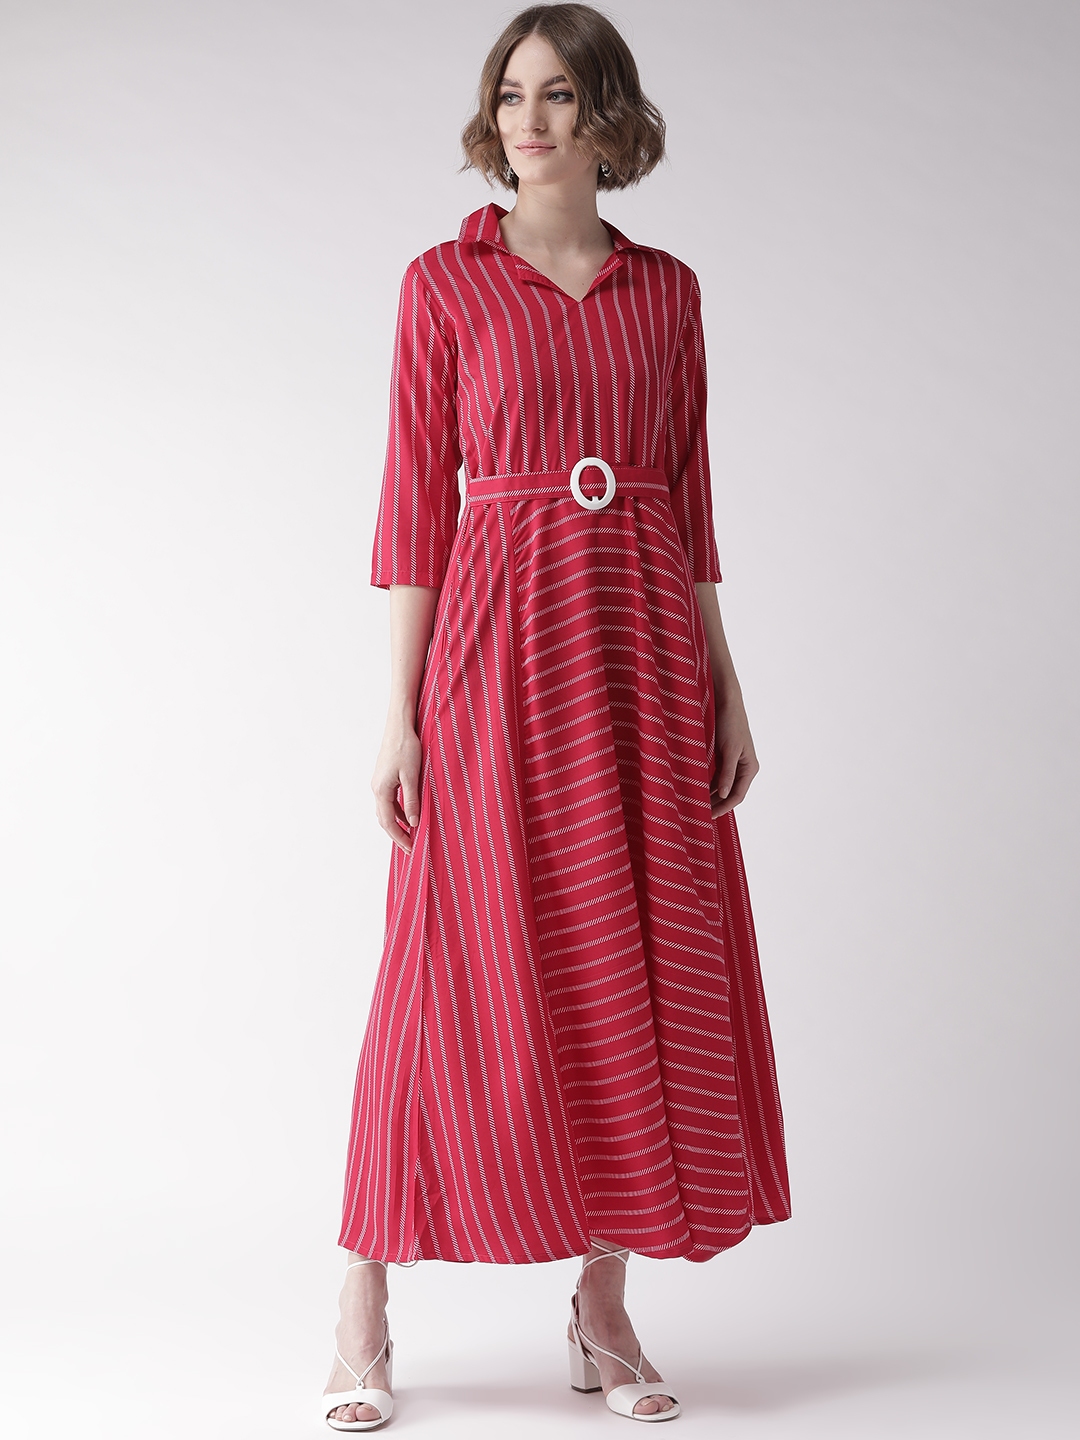 Buy Uandf Women Red And White Striped Maxi Dress Dresses For Women 11411154 Myntra